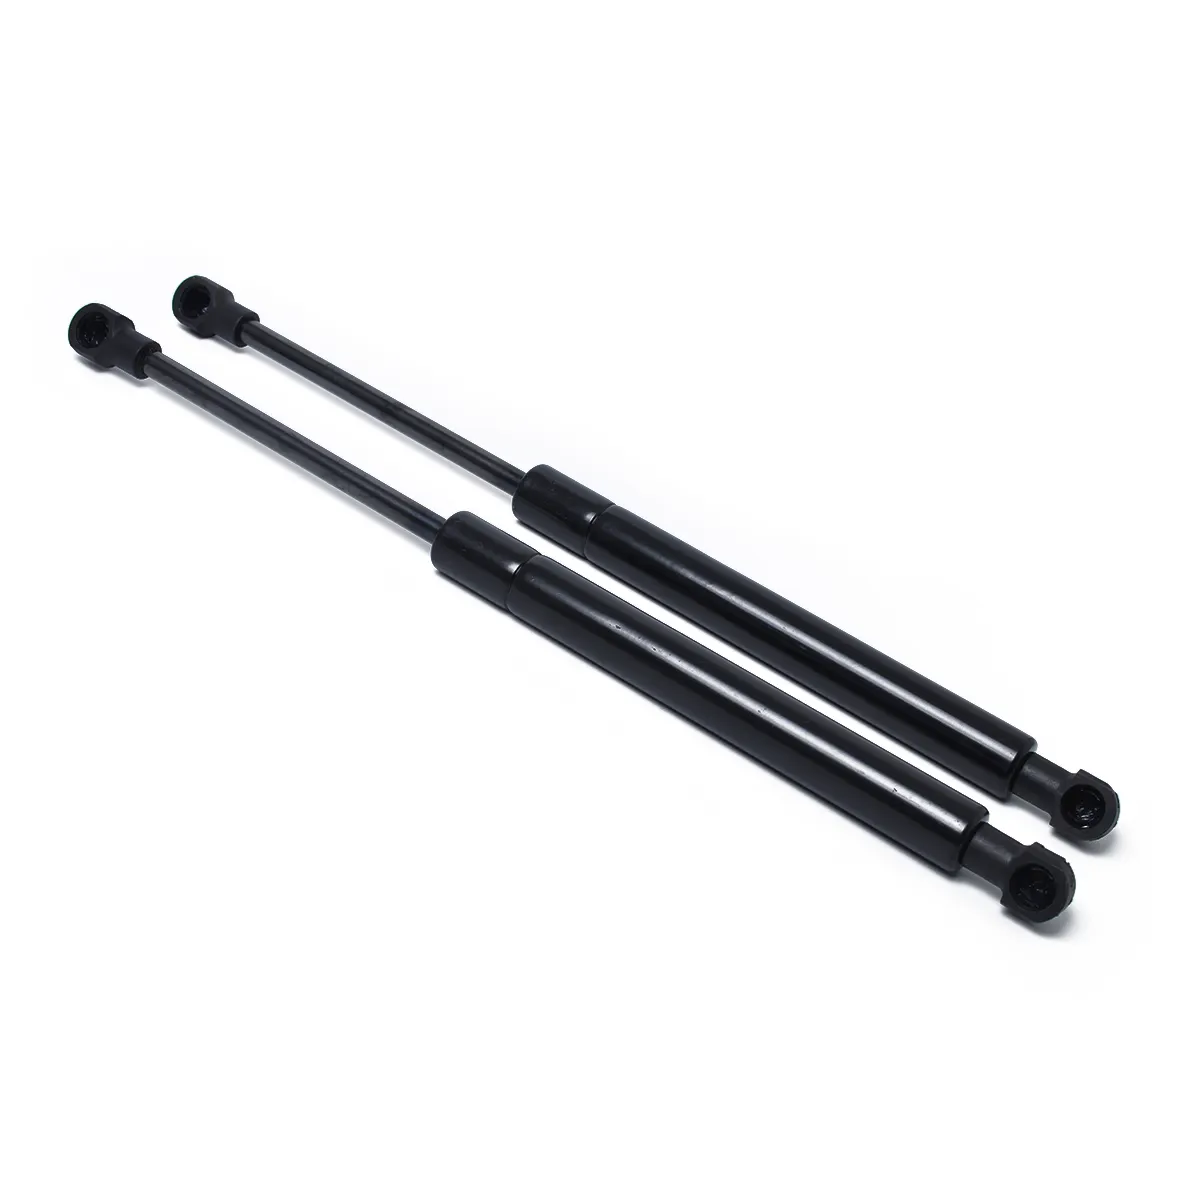 Hood Llift Support Gas Spring Shock Wholesale Price at BAJUTU For BMW E60 E61 5 series OE:51237008745